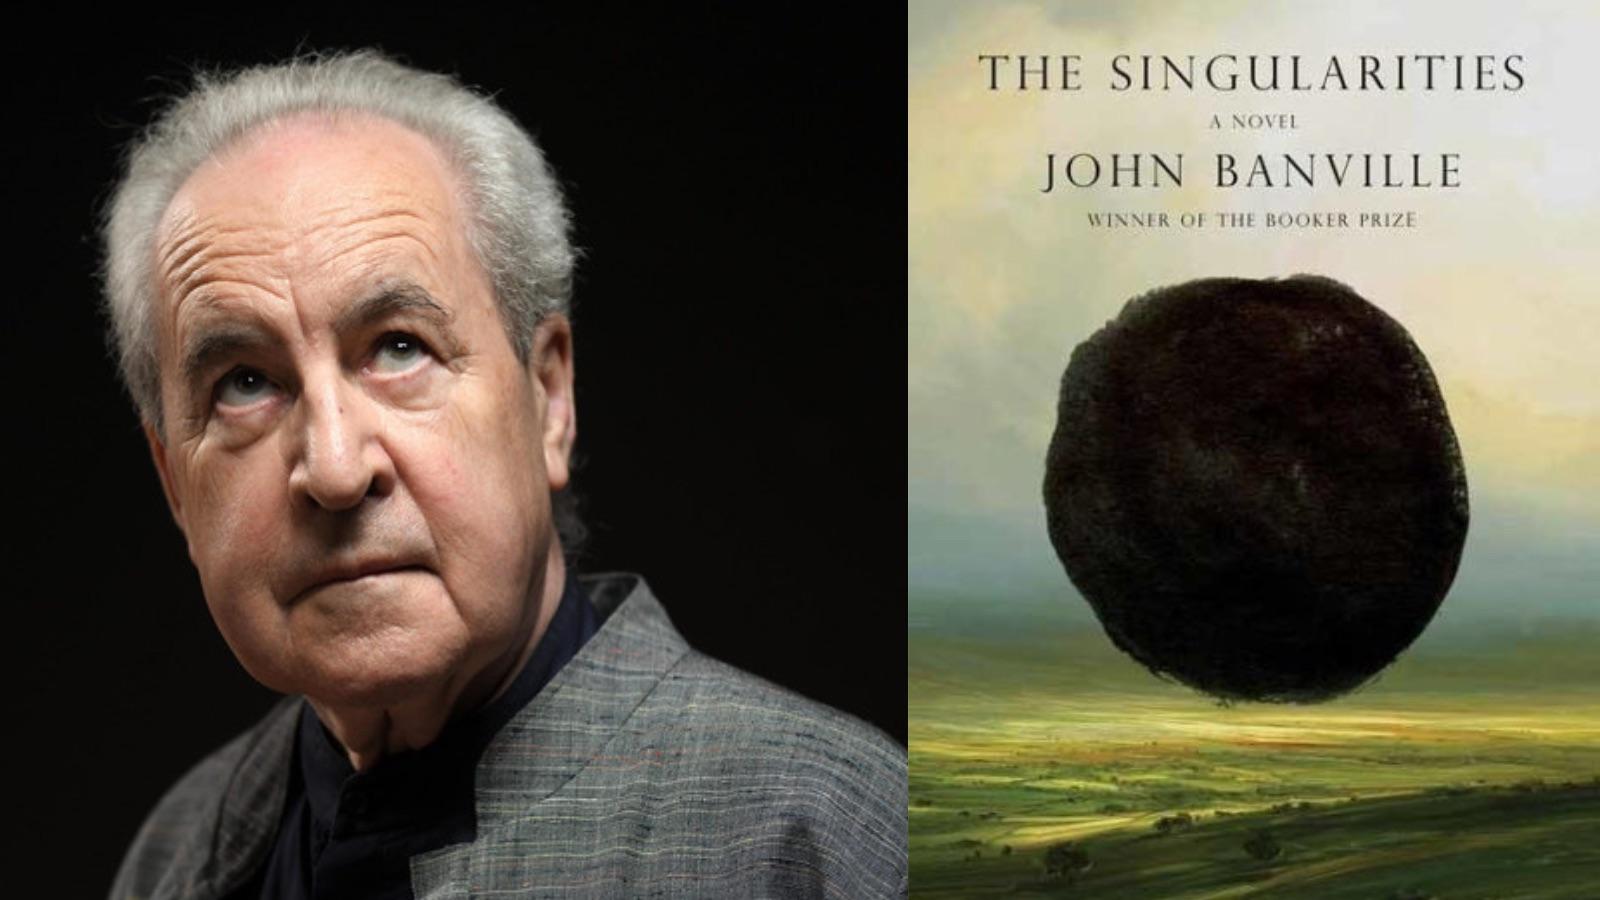 John banville and book cover